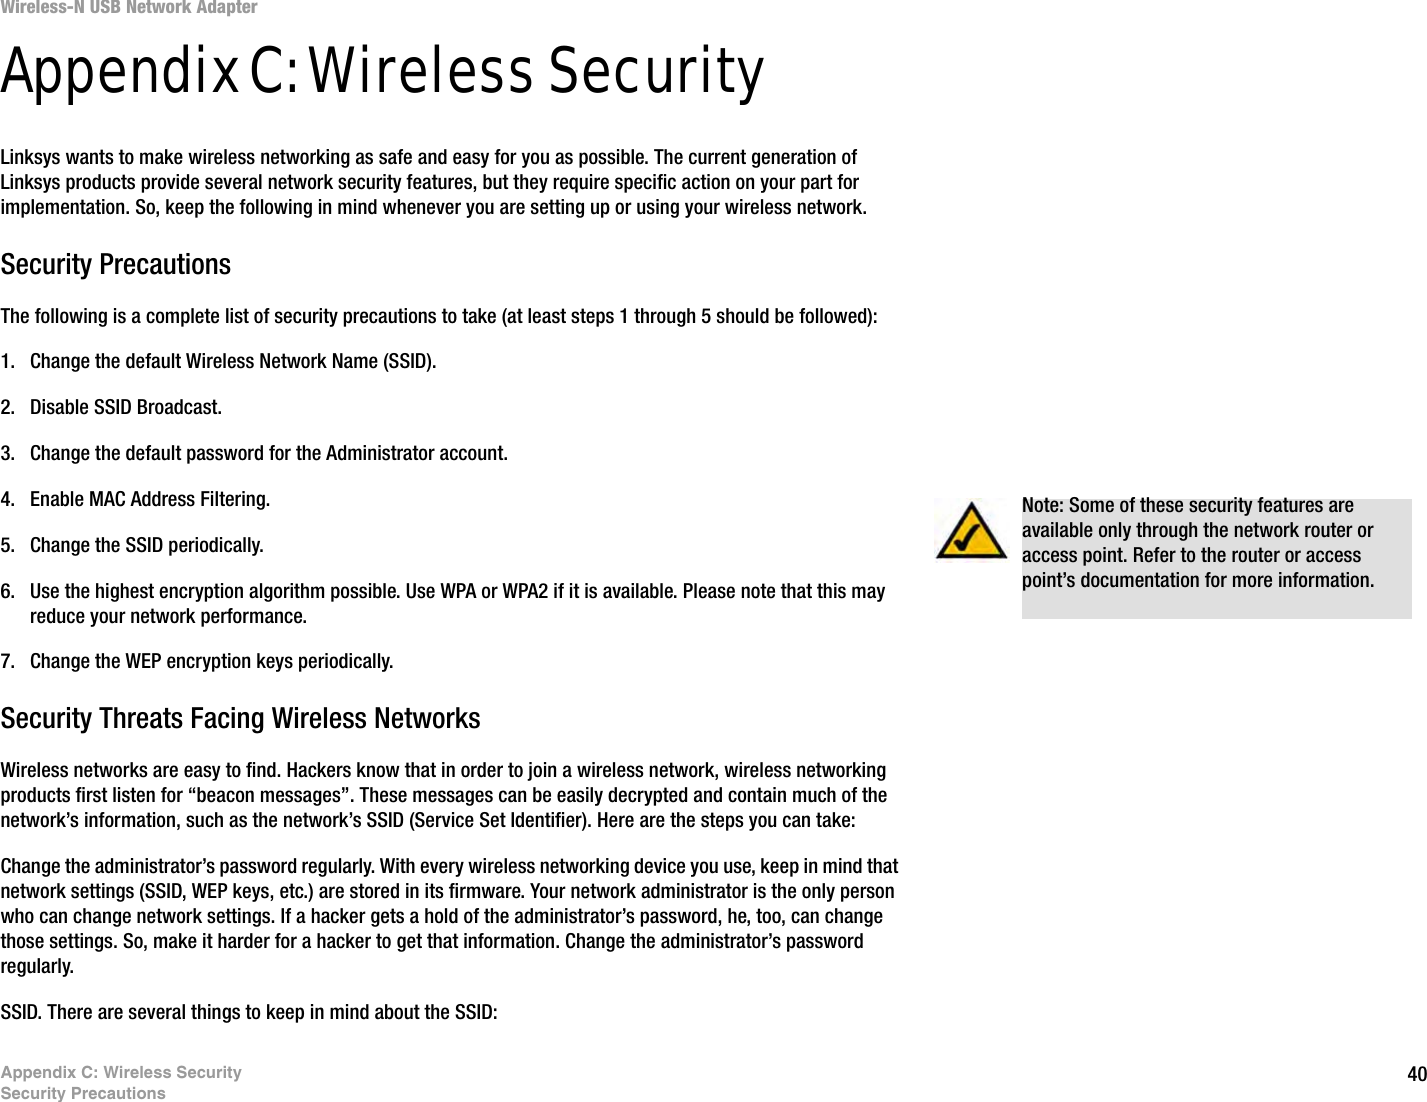 40Appendix C: Wireless SecuritySecurity PrecautionsWireless-N USB Network AdapterAppendix C: Wireless SecurityLinksys wants to make wireless networking as safe and easy for you as possible. The current generation of Linksys products provide several network security features, but they require specific action on your part for implementation. So, keep the following in mind whenever you are setting up or using your wireless network.Security PrecautionsThe following is a complete list of security precautions to take (at least steps 1 through 5 should be followed):1. Change the default Wireless Network Name (SSID). 2. Disable SSID Broadcast. 3. Change the default password for the Administrator account. 4. Enable MAC Address Filtering. 5. Change the SSID periodically. 6. Use the highest encryption algorithm possible. Use WPA or WPA2 if it is available. Please note that this may reduce your network performance. 7. Change the WEP encryption keys periodically. Security Threats Facing Wireless Networks Wireless networks are easy to find. Hackers know that in order to join a wireless network, wireless networking products first listen for “beacon messages”. These messages can be easily decrypted and contain much of the network’s information, such as the network’s SSID (Service Set Identifier). Here are the steps you can take:Change the administrator’s password regularly. With every wireless networking device you use, keep in mind that network settings (SSID, WEP keys, etc.) are stored in its firmware. Your network administrator is the only person who can change network settings. If a hacker gets a hold of the administrator’s password, he, too, can change those settings. So, make it harder for a hacker to get that information. Change the administrator’s password regularly.SSID. There are several things to keep in mind about the SSID: Note: Some of these security features are available only through the network router or access point. Refer to the router or access point’s documentation for more information.